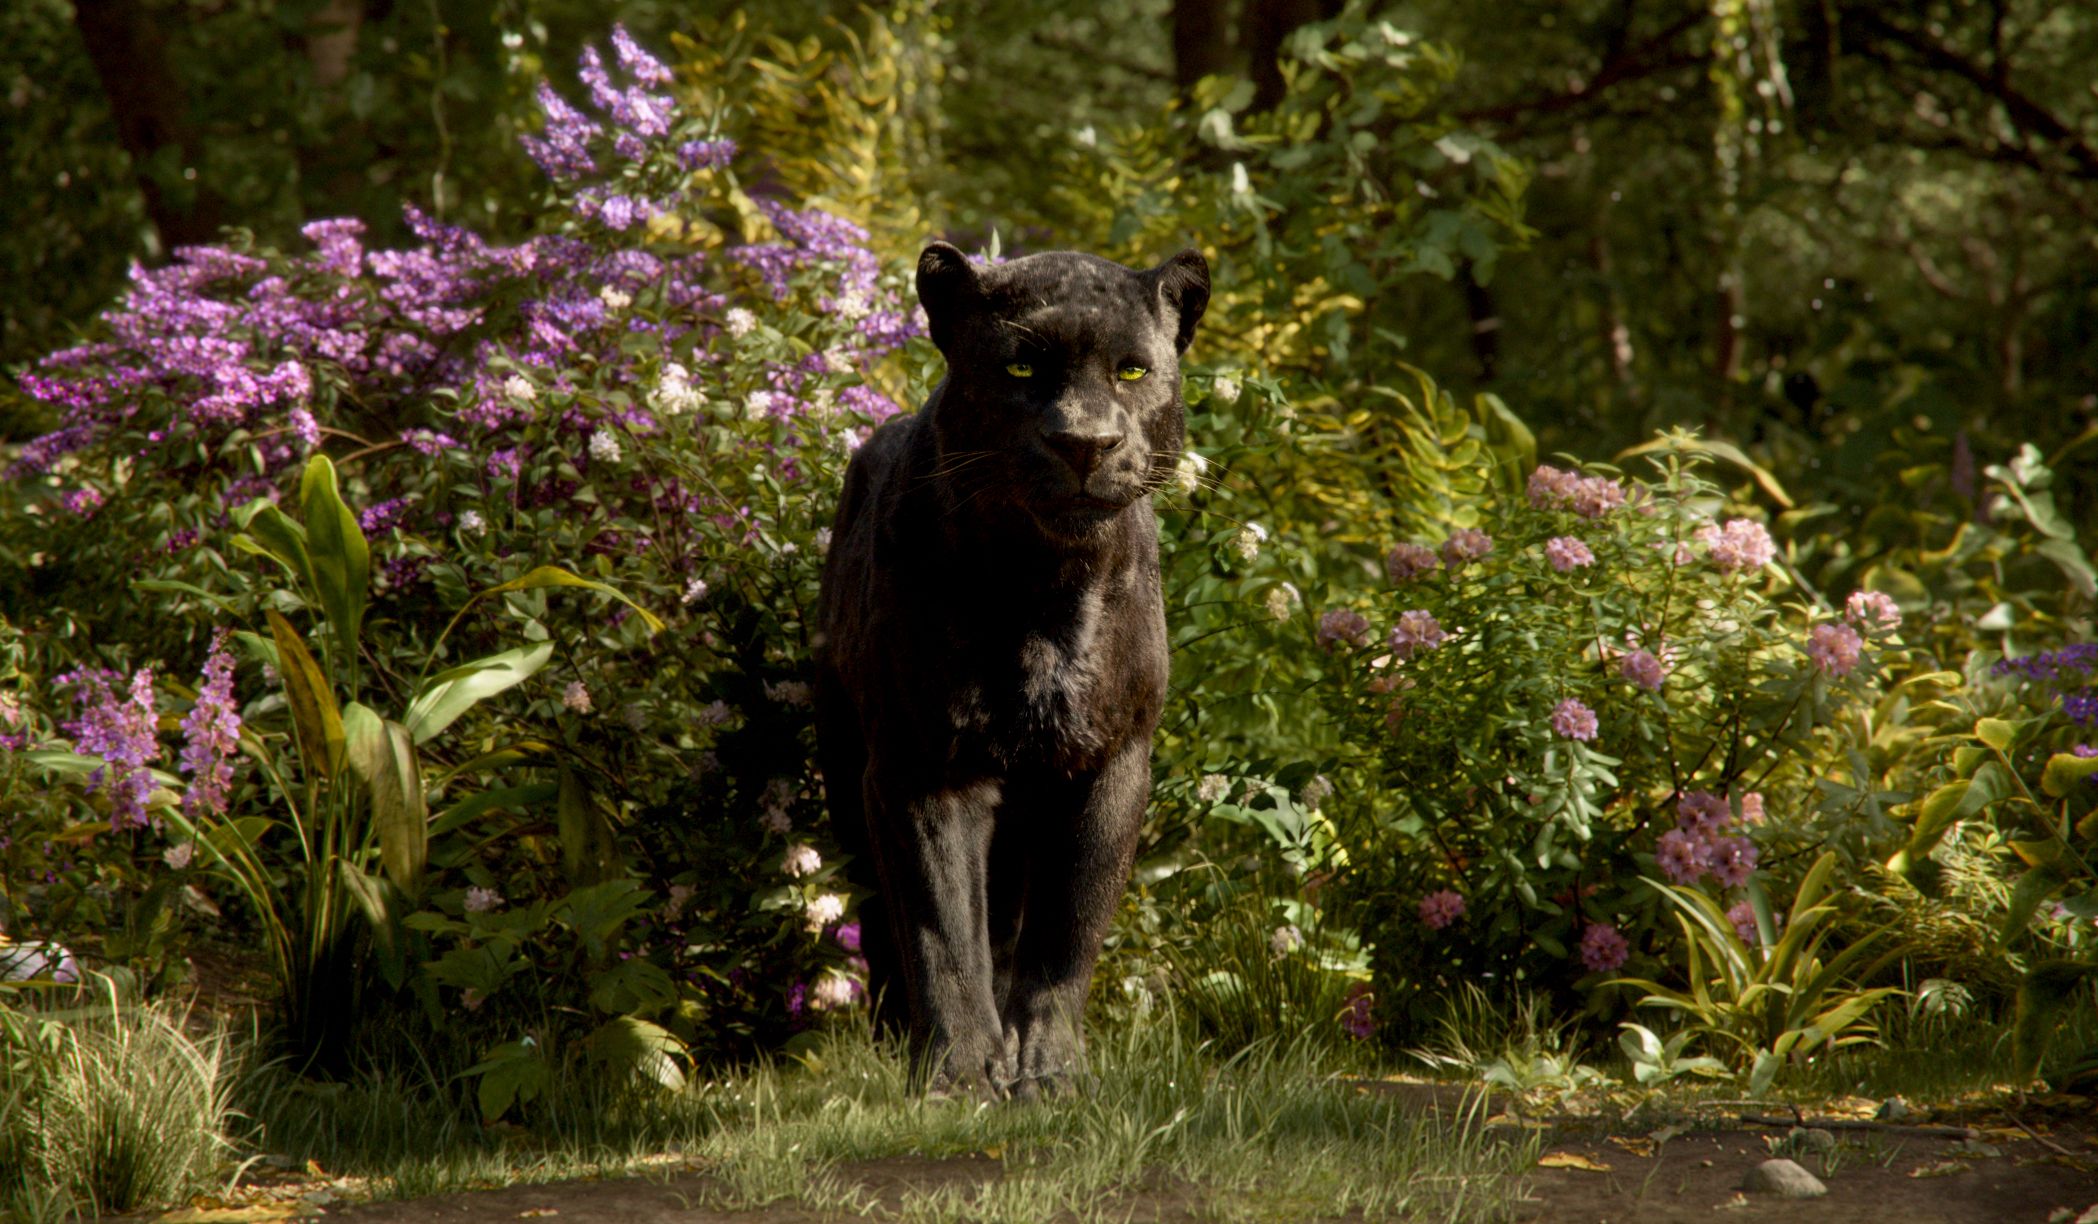 Box Office: The Jungle Book Astounds with $103.5 Million | Collider